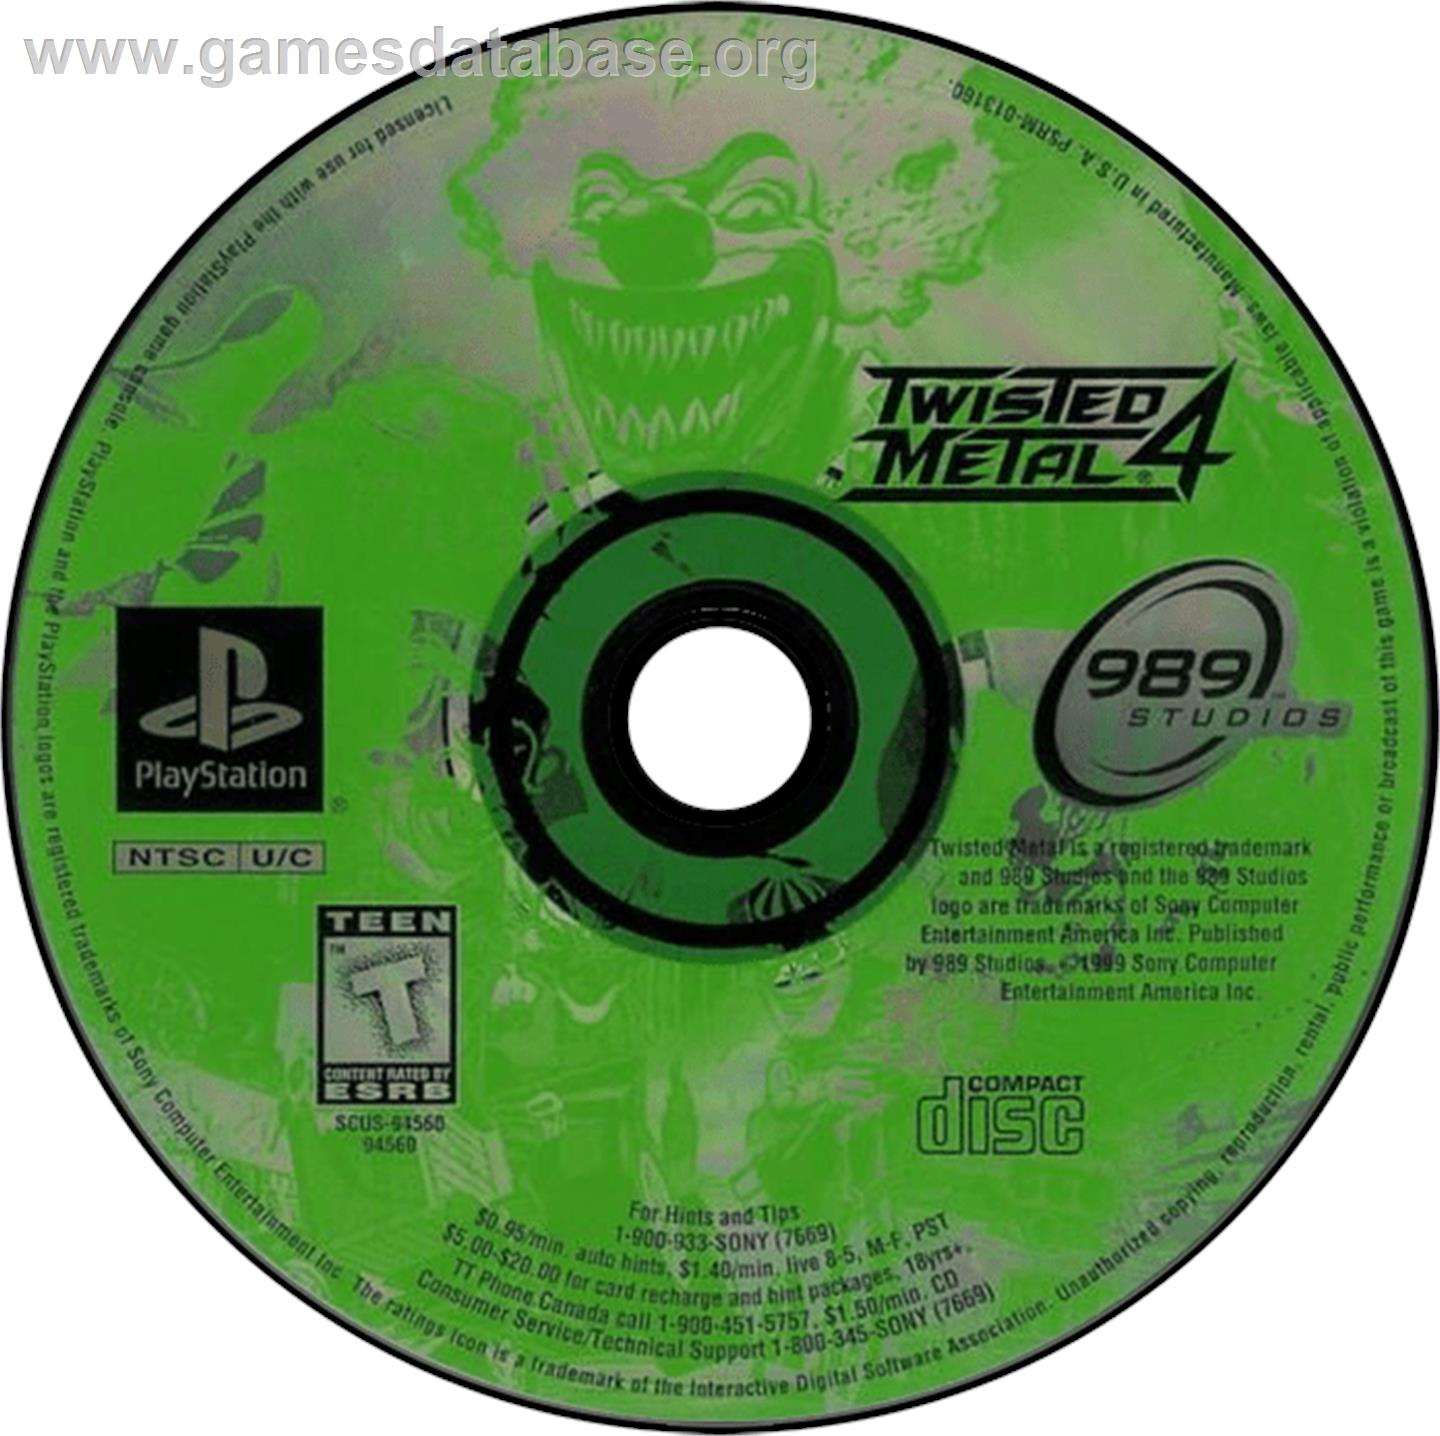 Twisted Metal 4 on PS1 by CocoBandicoot31 on DeviantArt